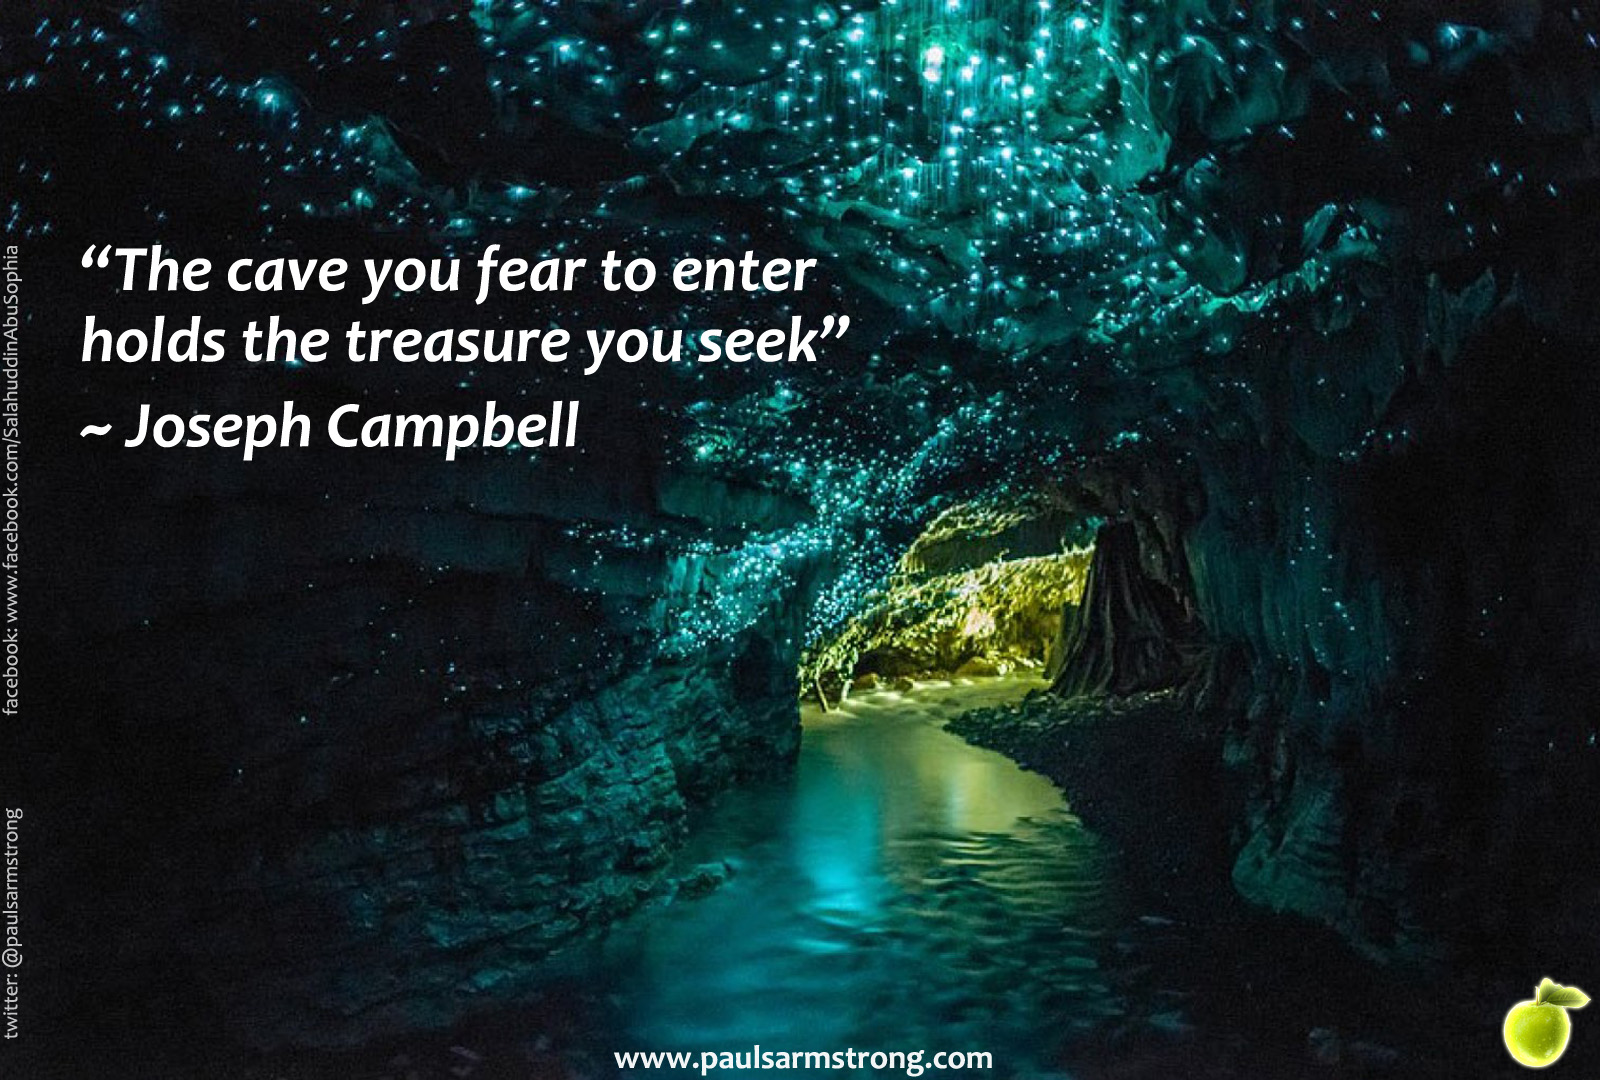 The cave you fear to enter… – Paul Salahuddin Armstrong